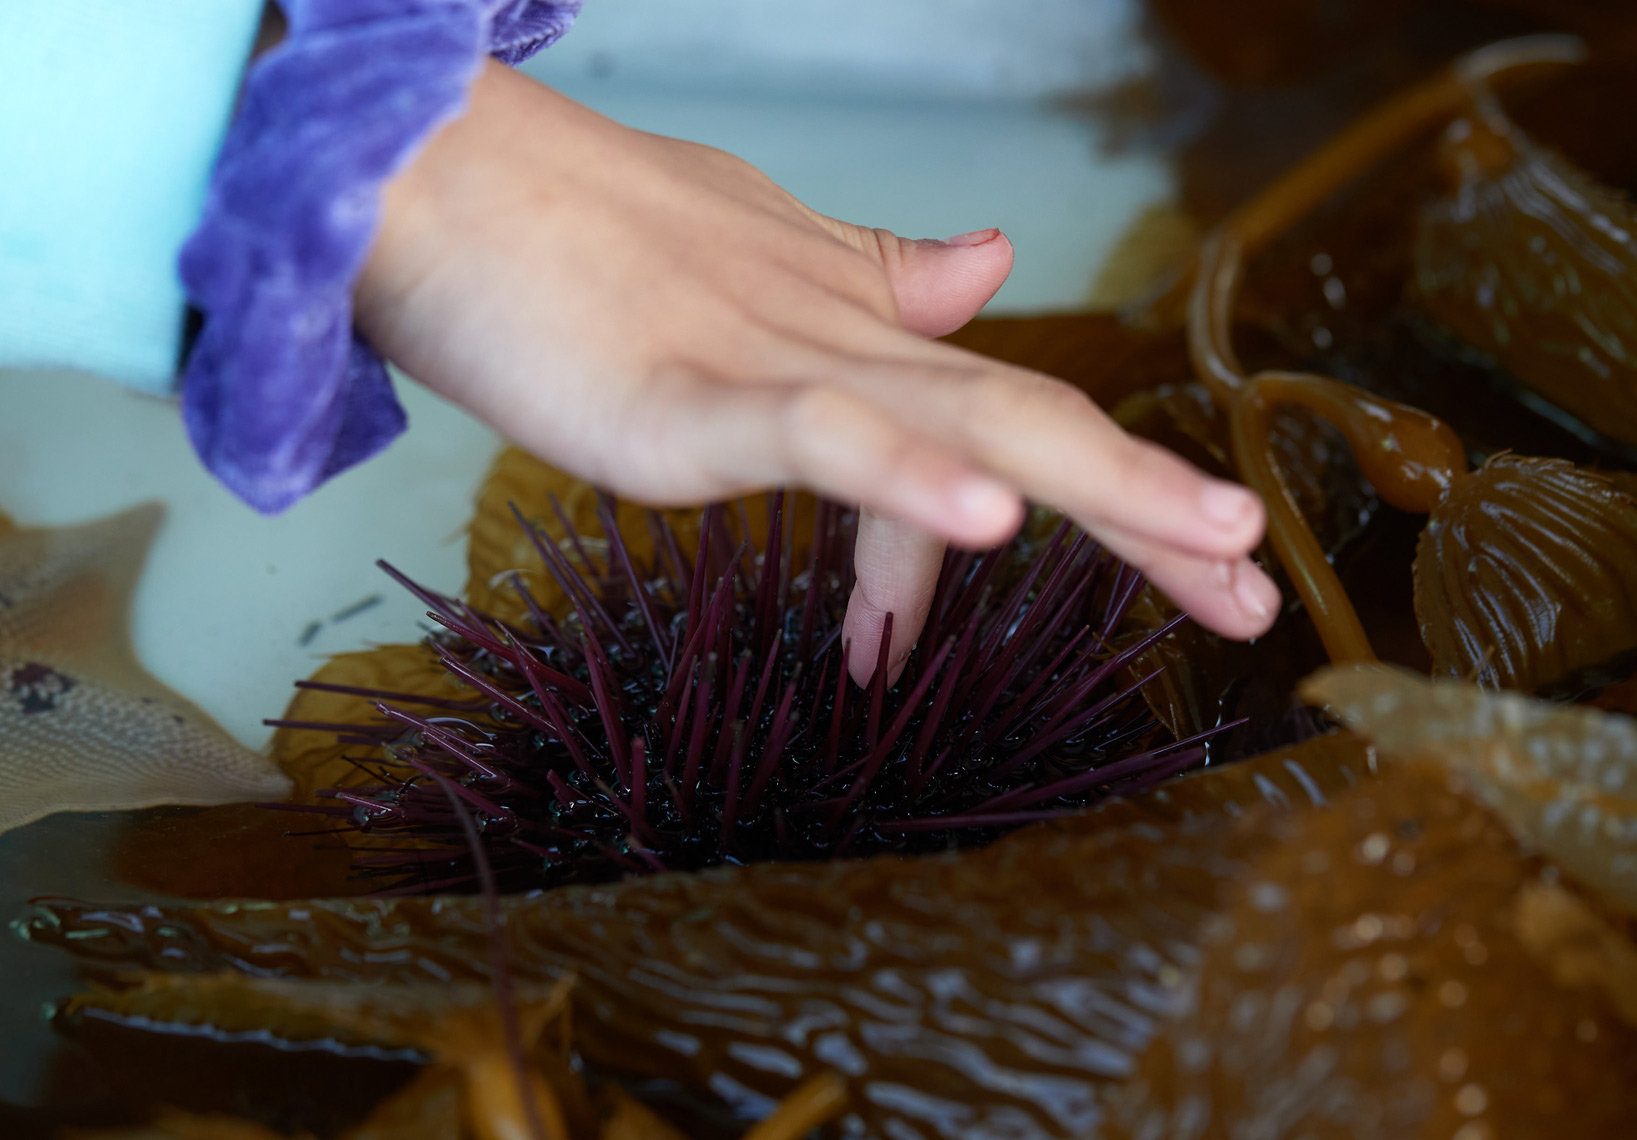 A Child Touches a Sea Urchin in Petting Pool